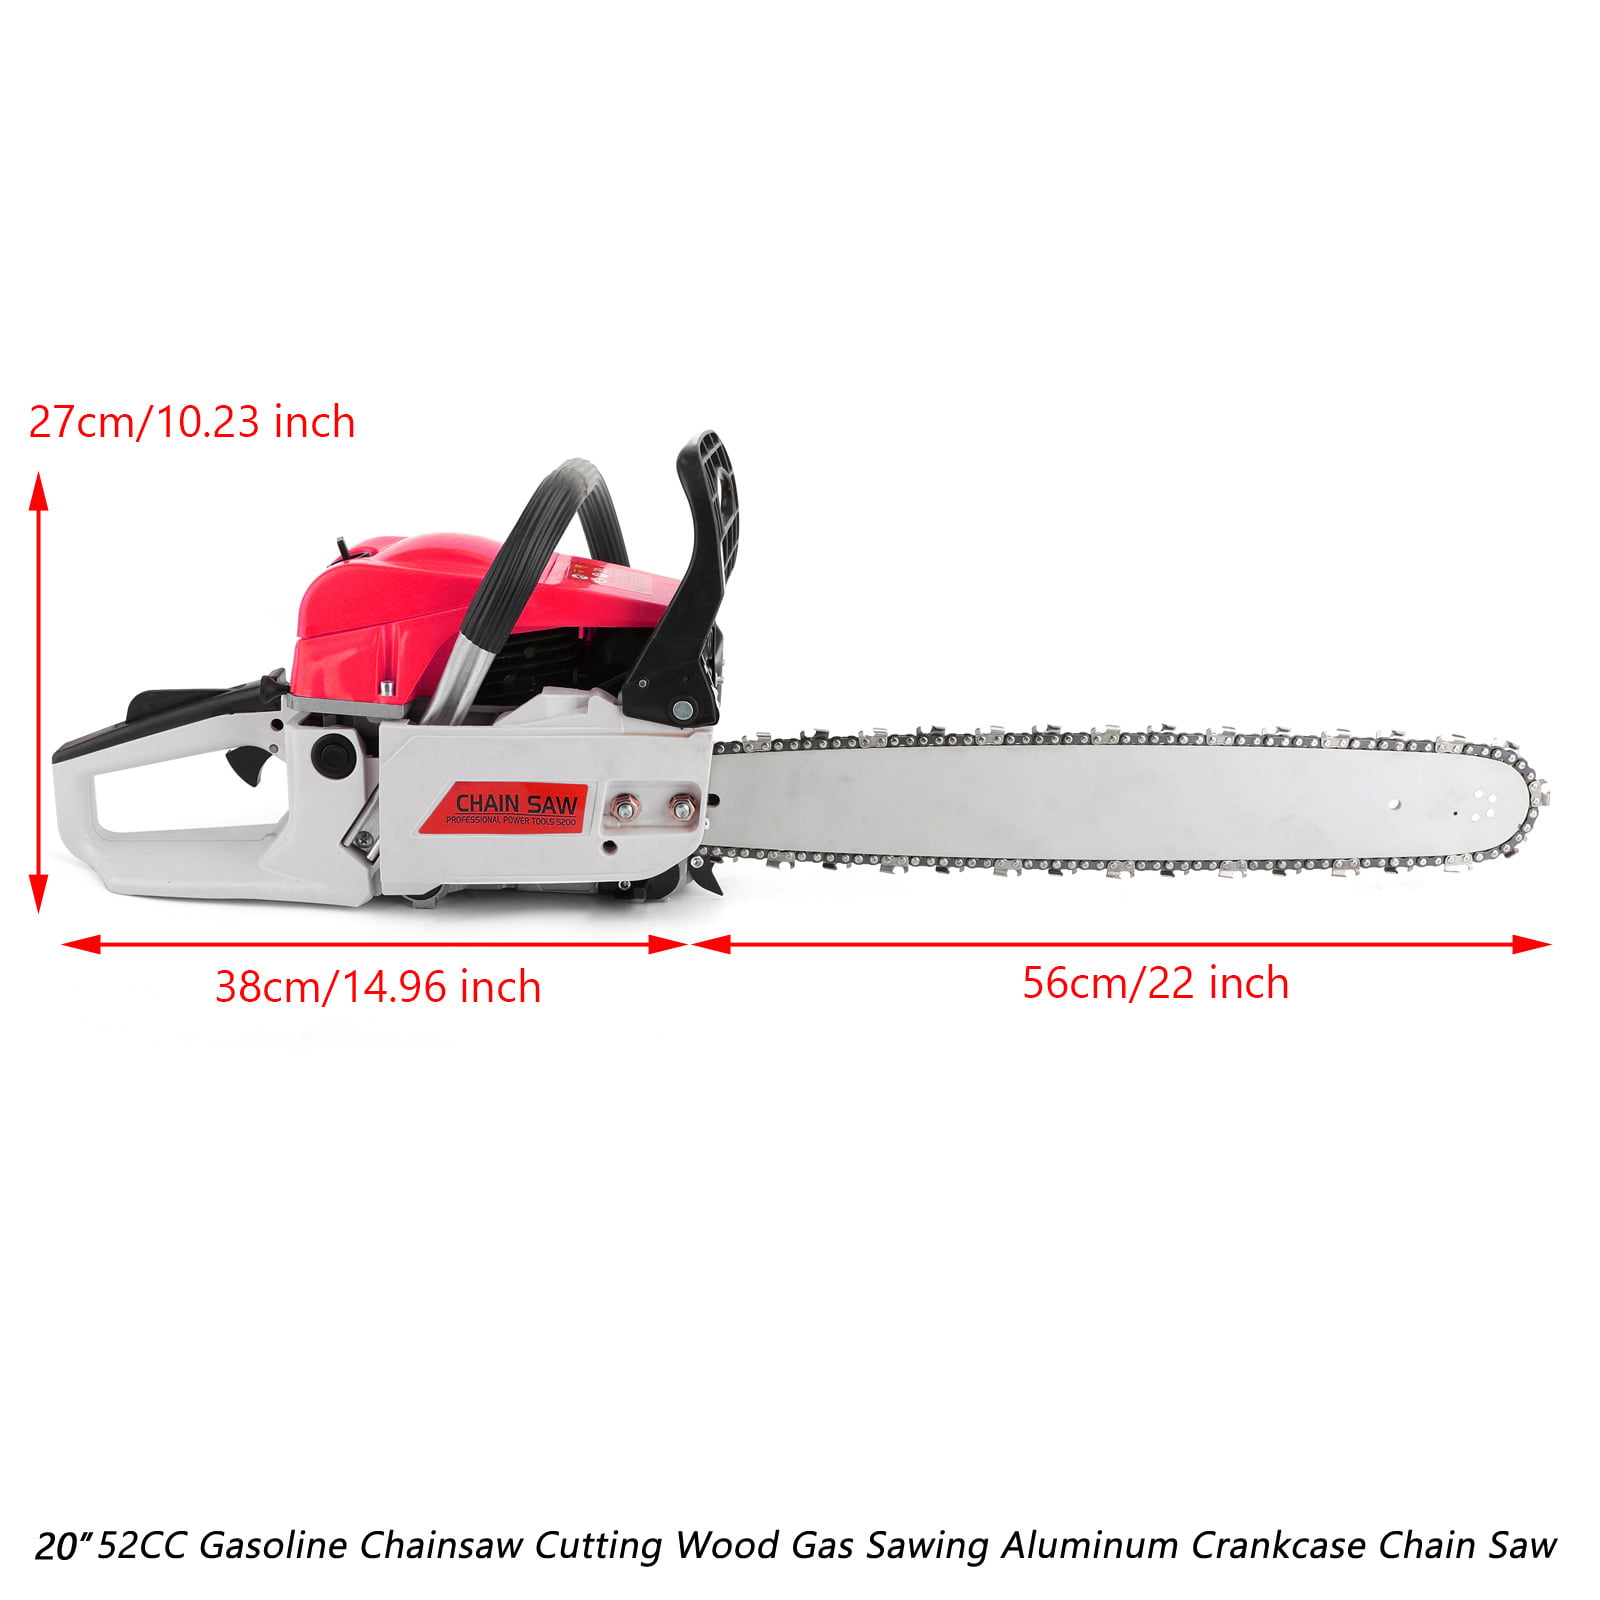 2 Chains and Bag Abizoe CTCS52 2-Cycle Gas Chainsaw,20 Inches,52cc Handheld Cordless Gasoline Chainsaws for Cutting Trees Wood Farm Orange 